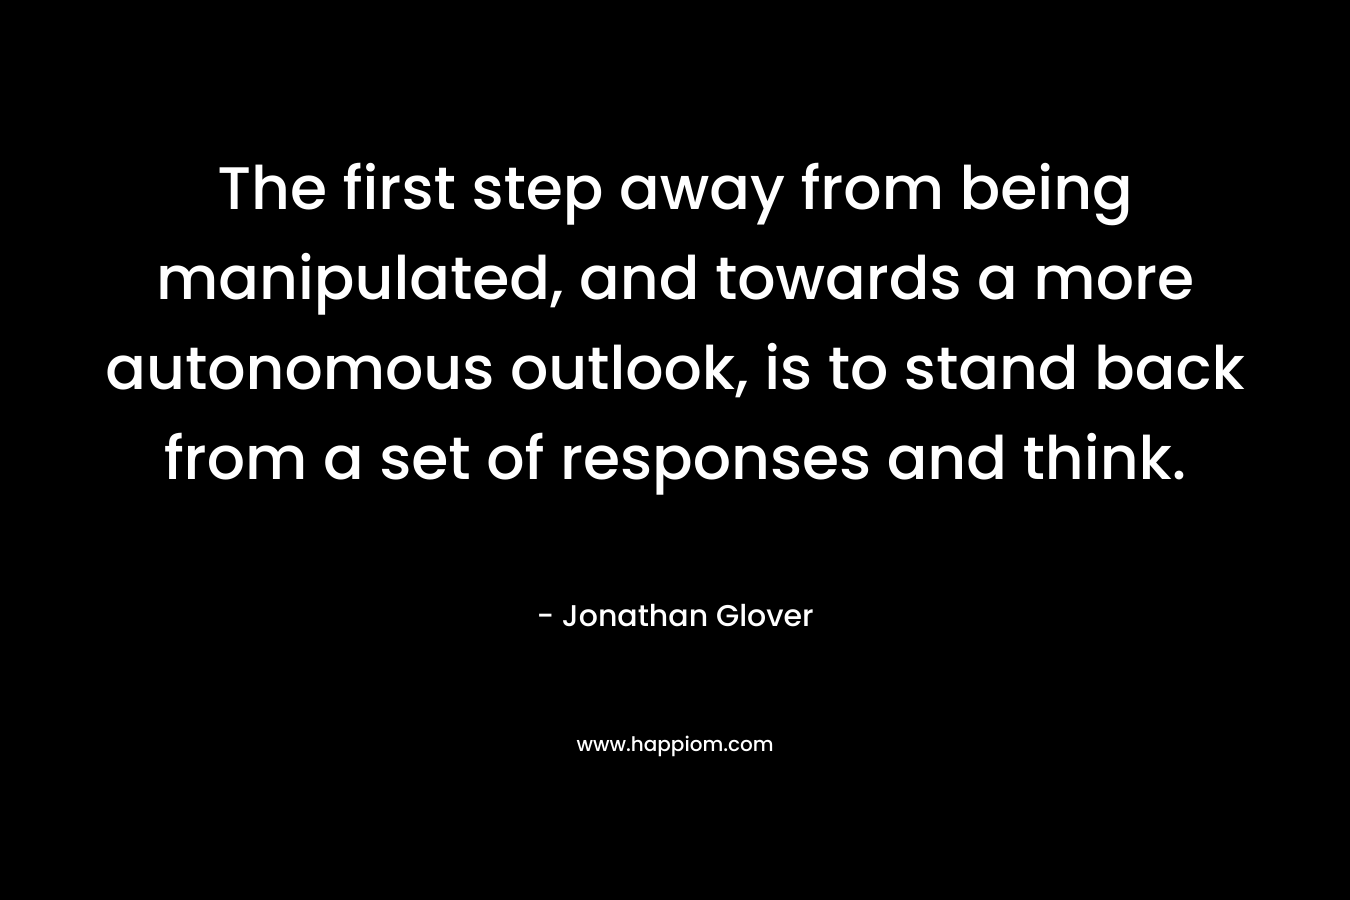 The first step away from being manipulated, and towards a more autonomous outlook, is to stand back from a set of responses and think. – Jonathan Glover